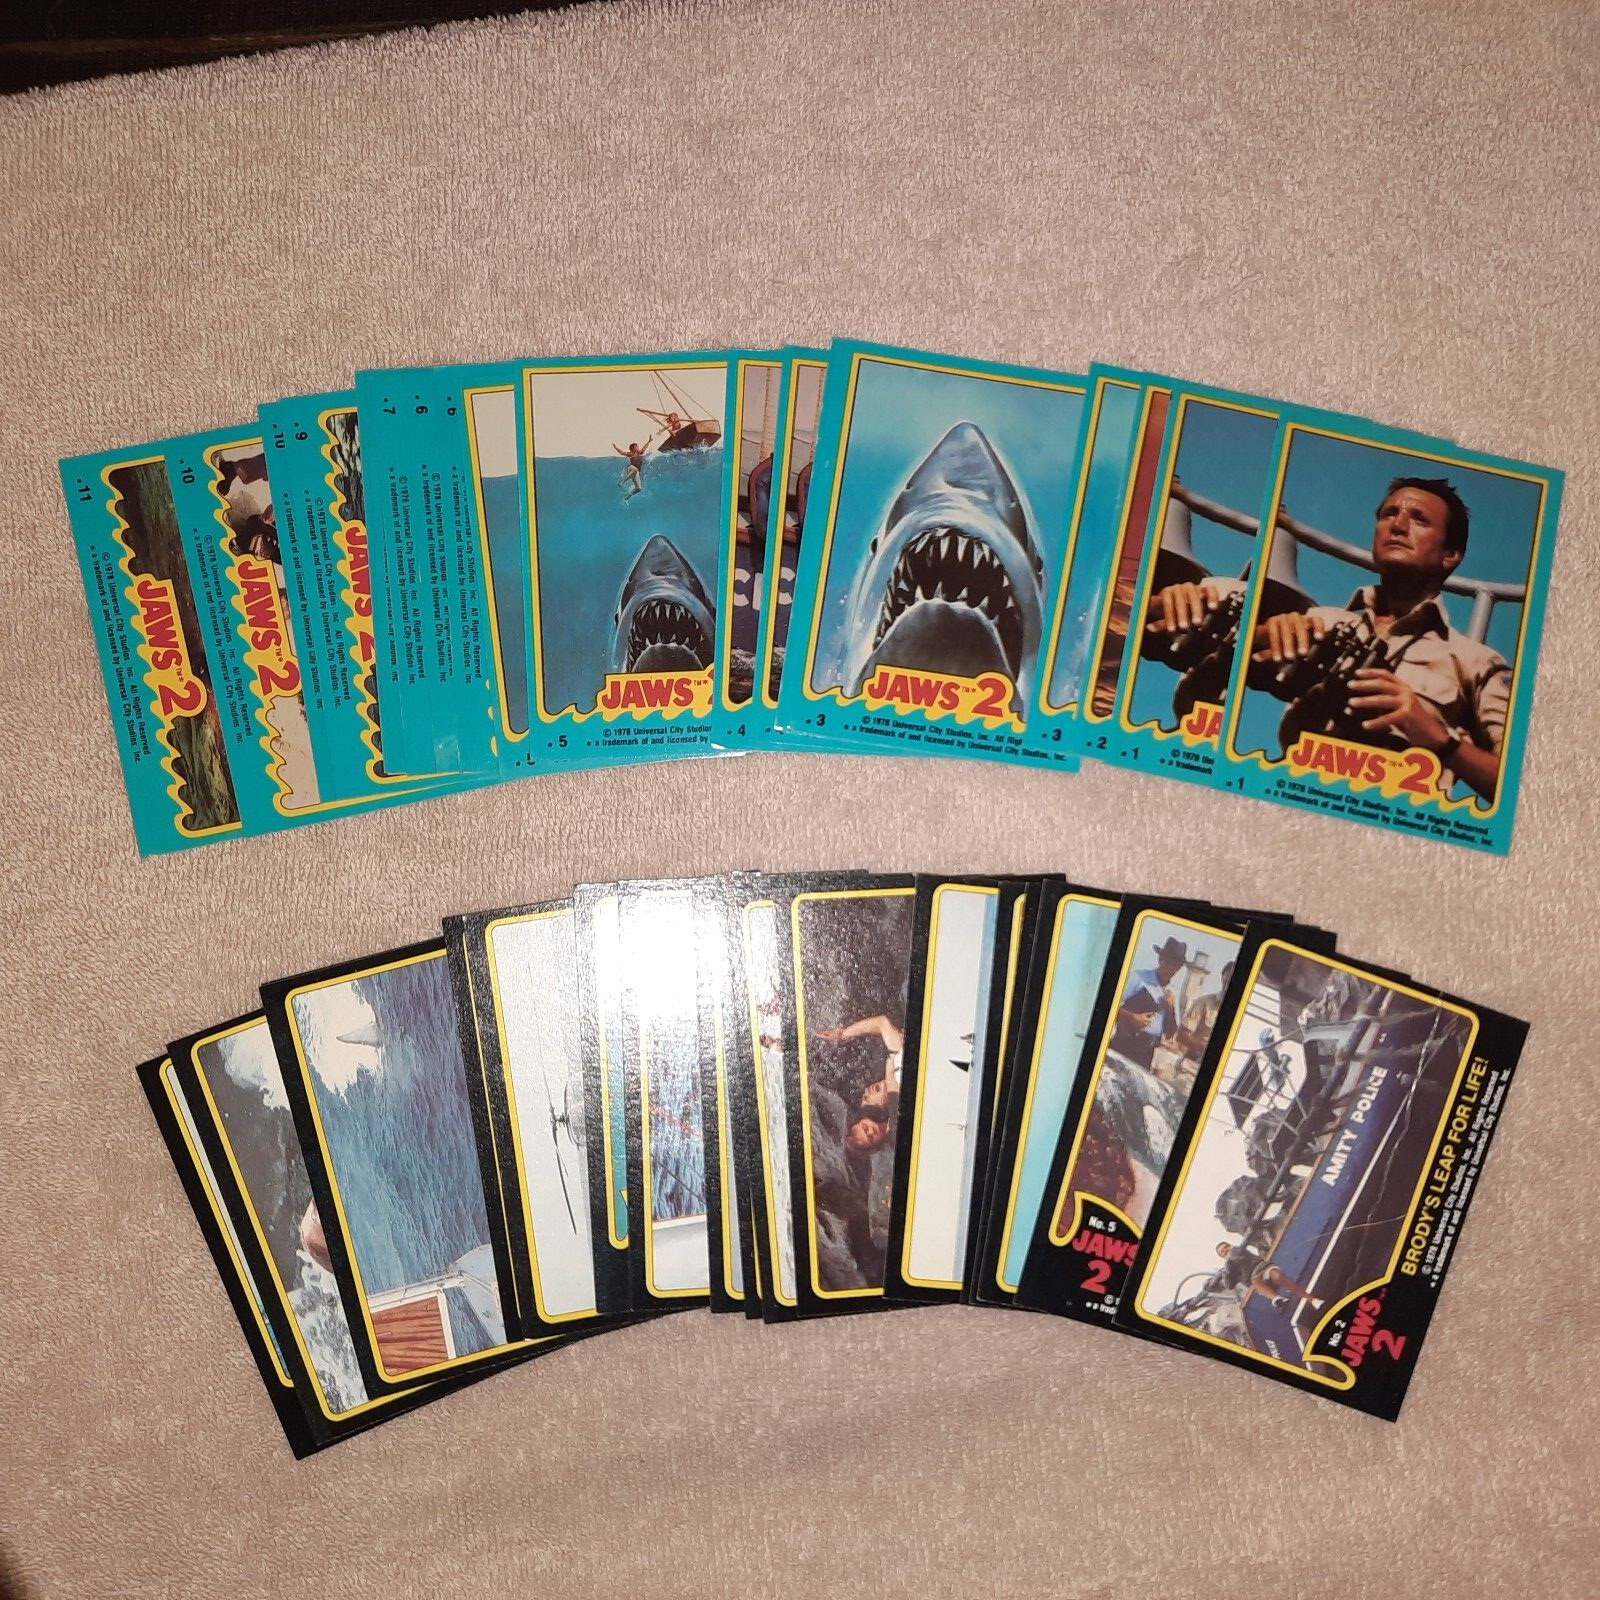 1978 Topps Jaws II Sticker Complete 11 Sticker Set+9 Doubles & 20 Jaws II Cards 